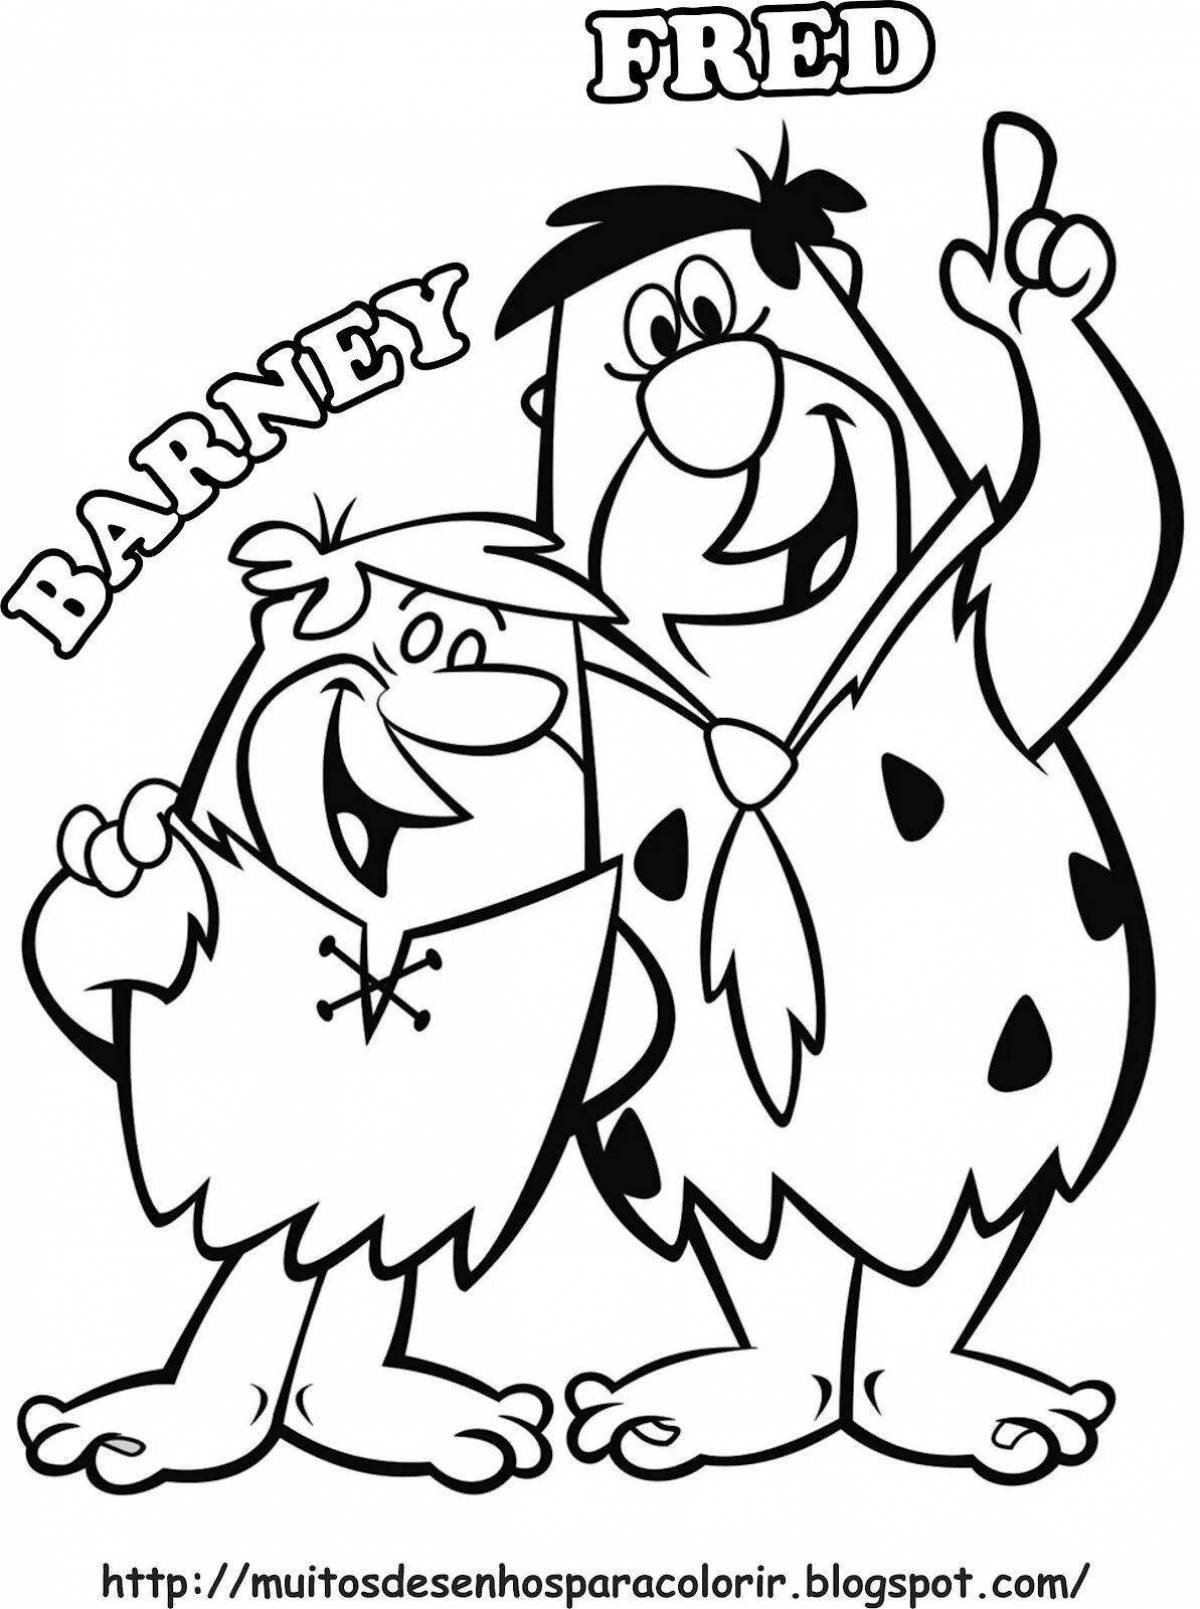 Fred flintstone's gorgeous coloring book